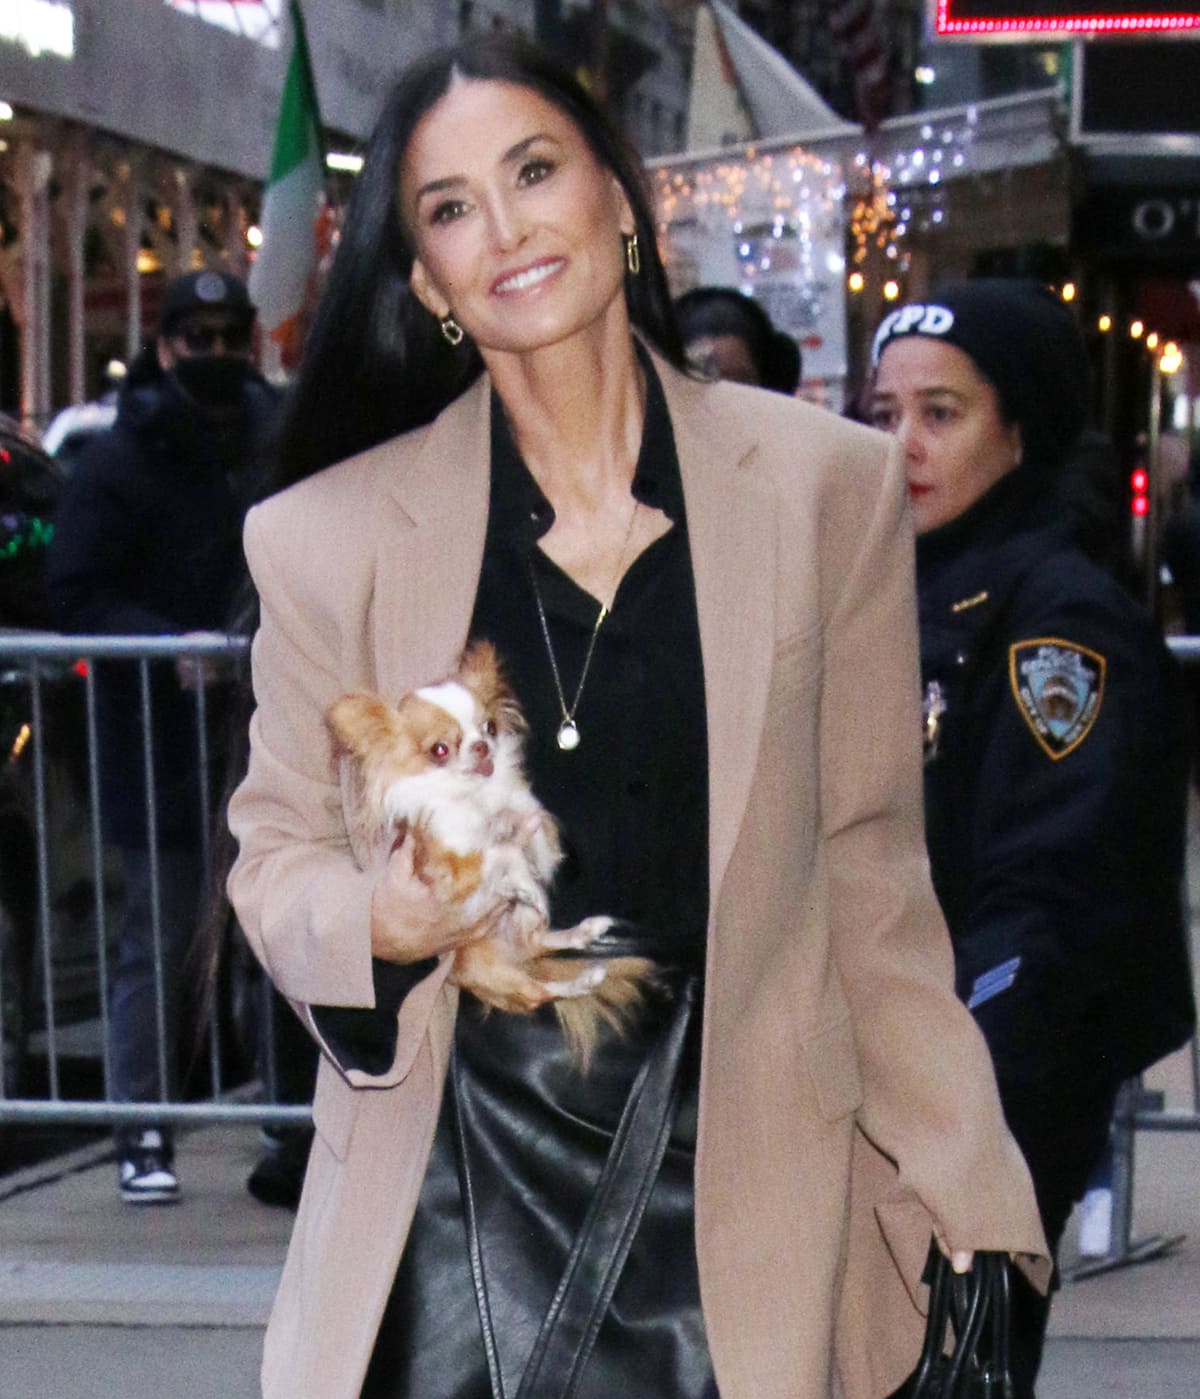 Demi Moore styles her look with Shy Creation earrings and a long pendant necklace while cradling her Chihuahua dog, Pilaf